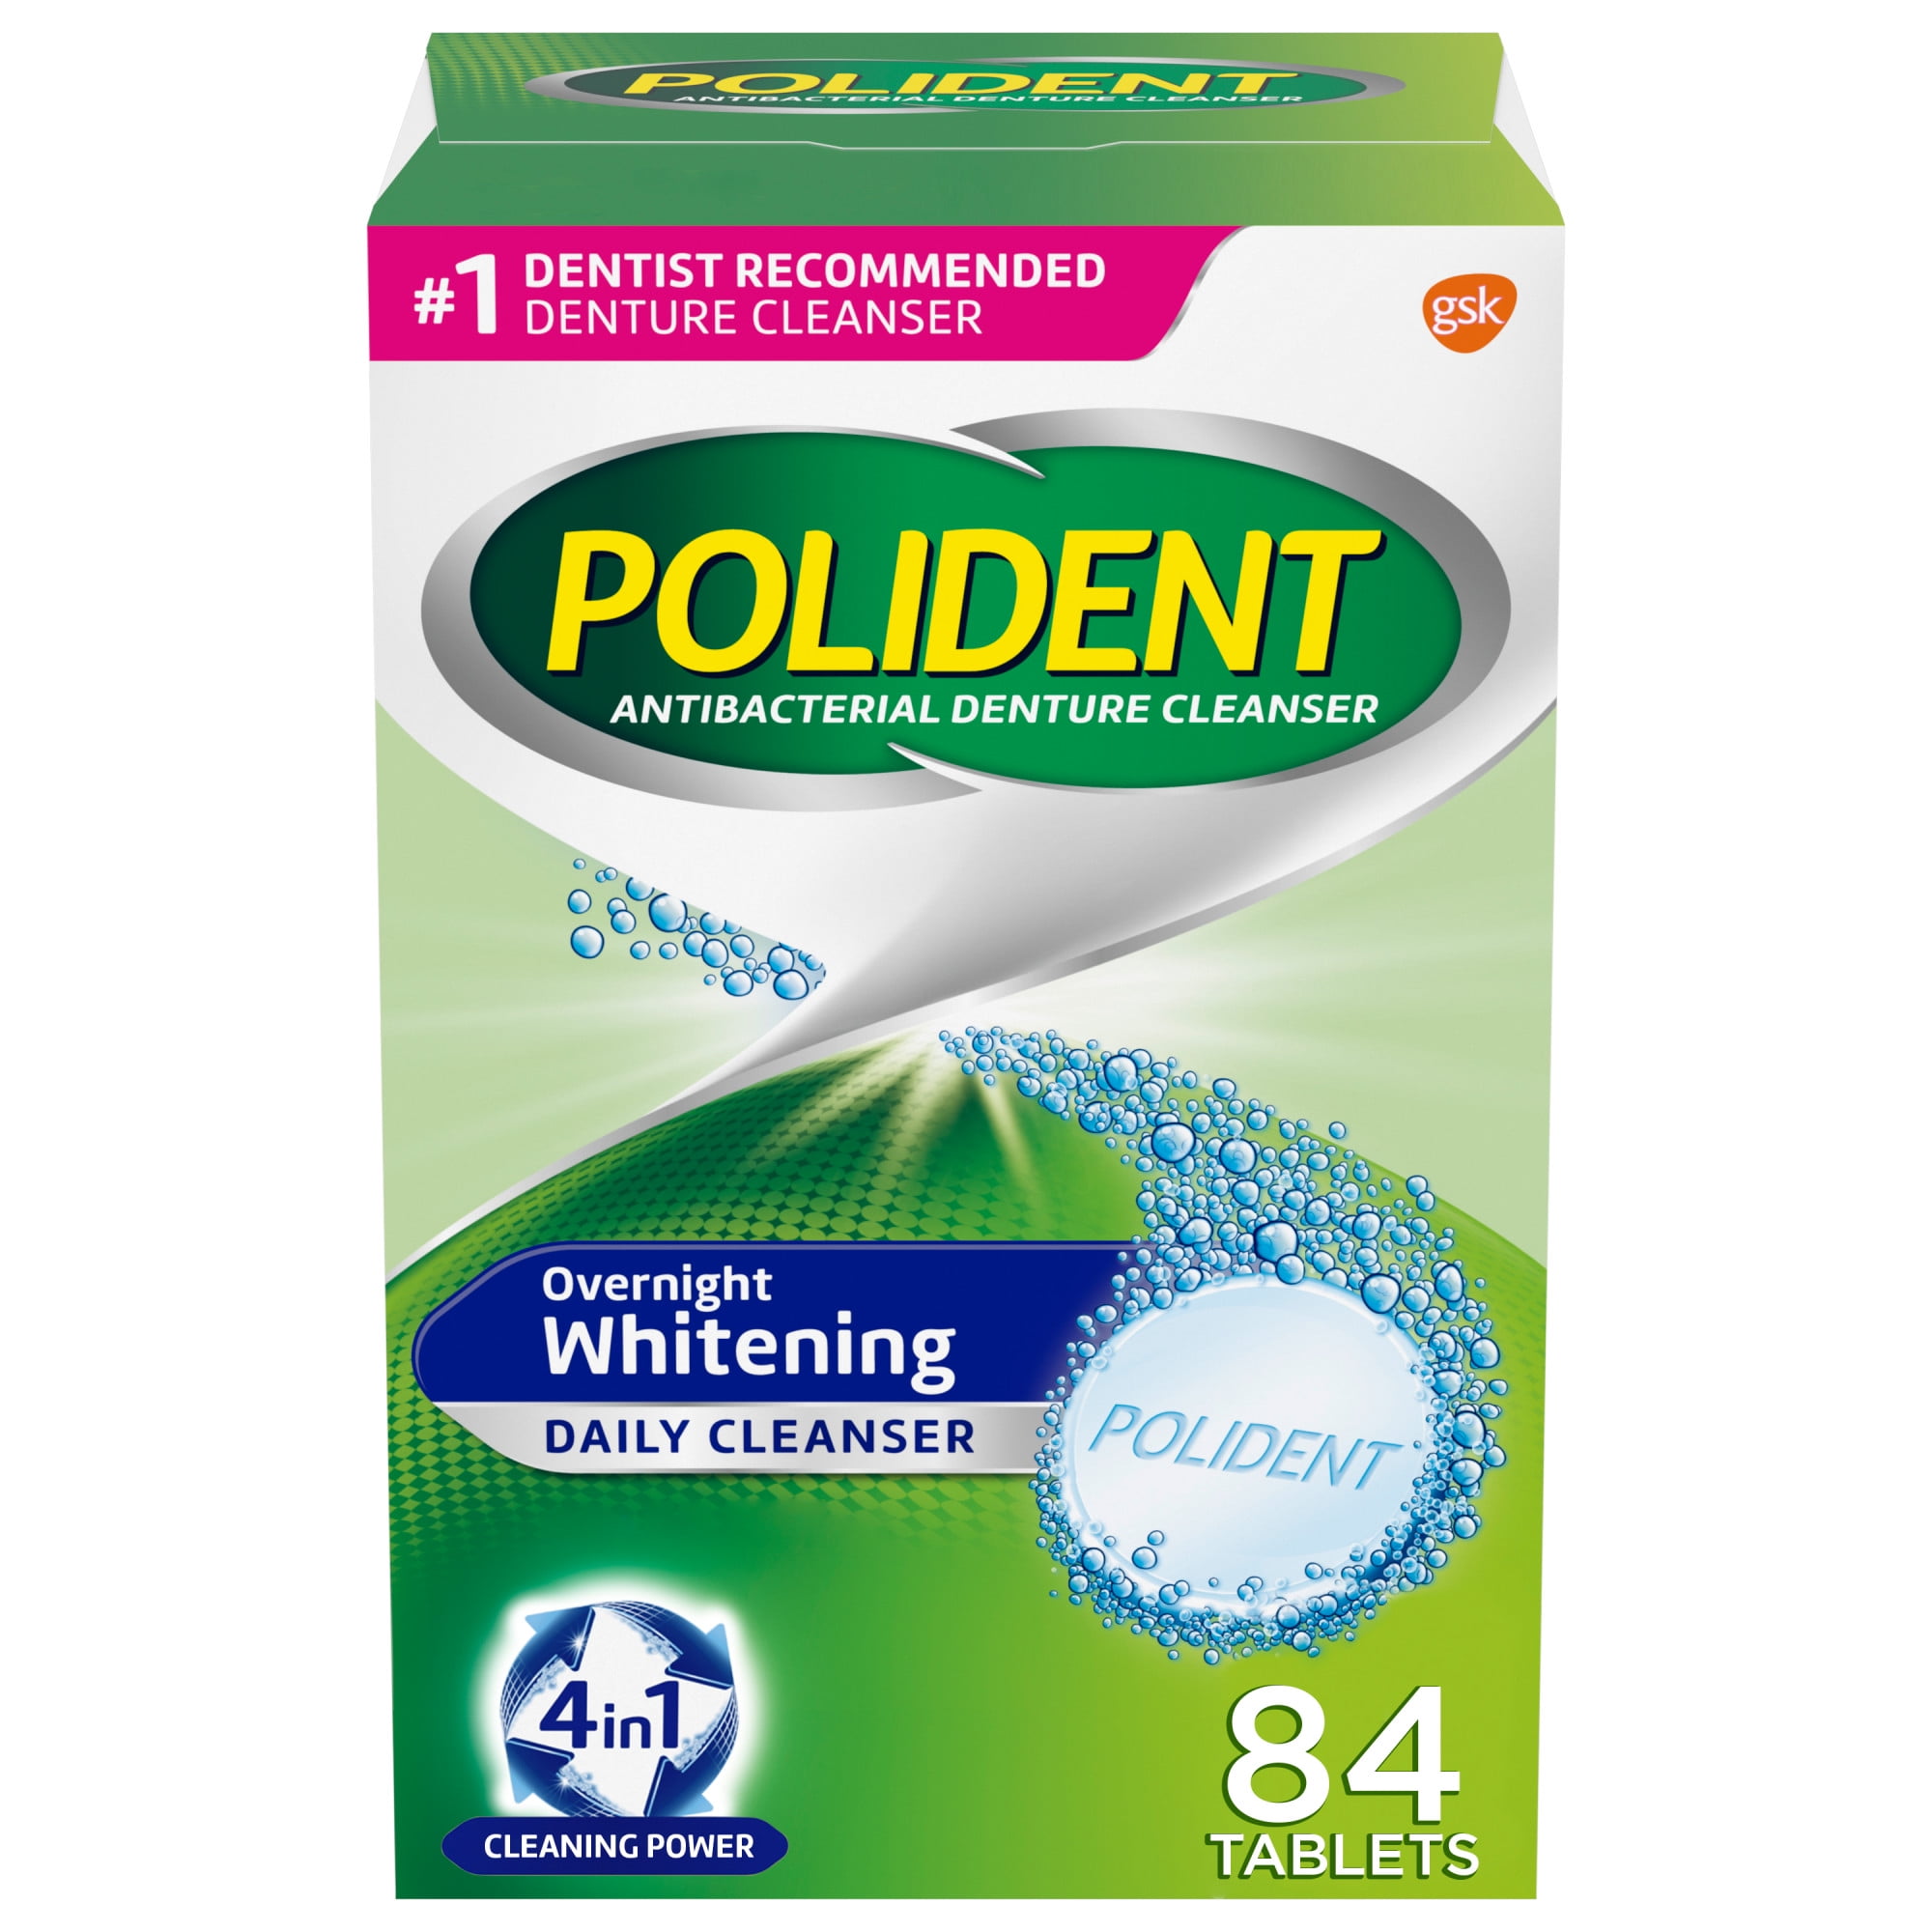 Polident Overnight Whitening Antibacterial Denture Cleanser Tablets, 84 Count